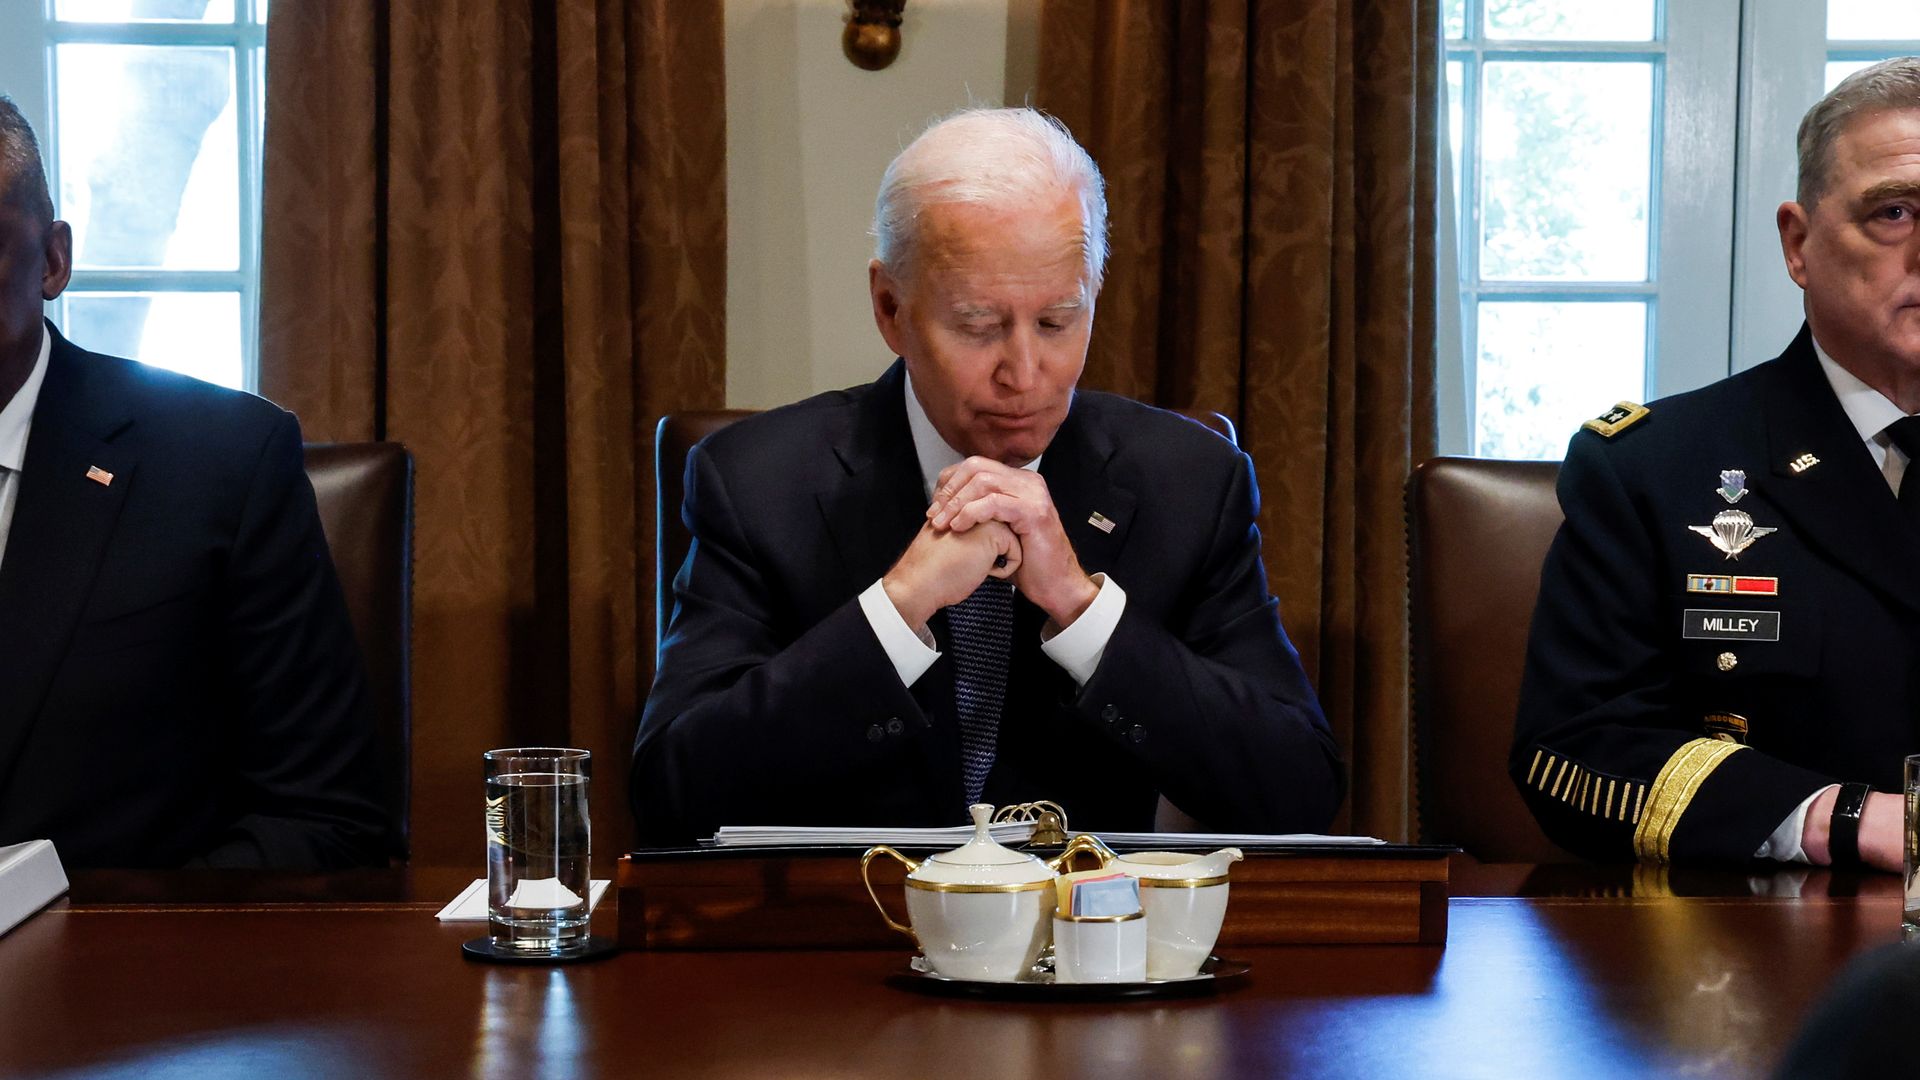 Biden is likely going to be the Democratic candidate in the 2024 election, but does he have what it takes to win the general election?